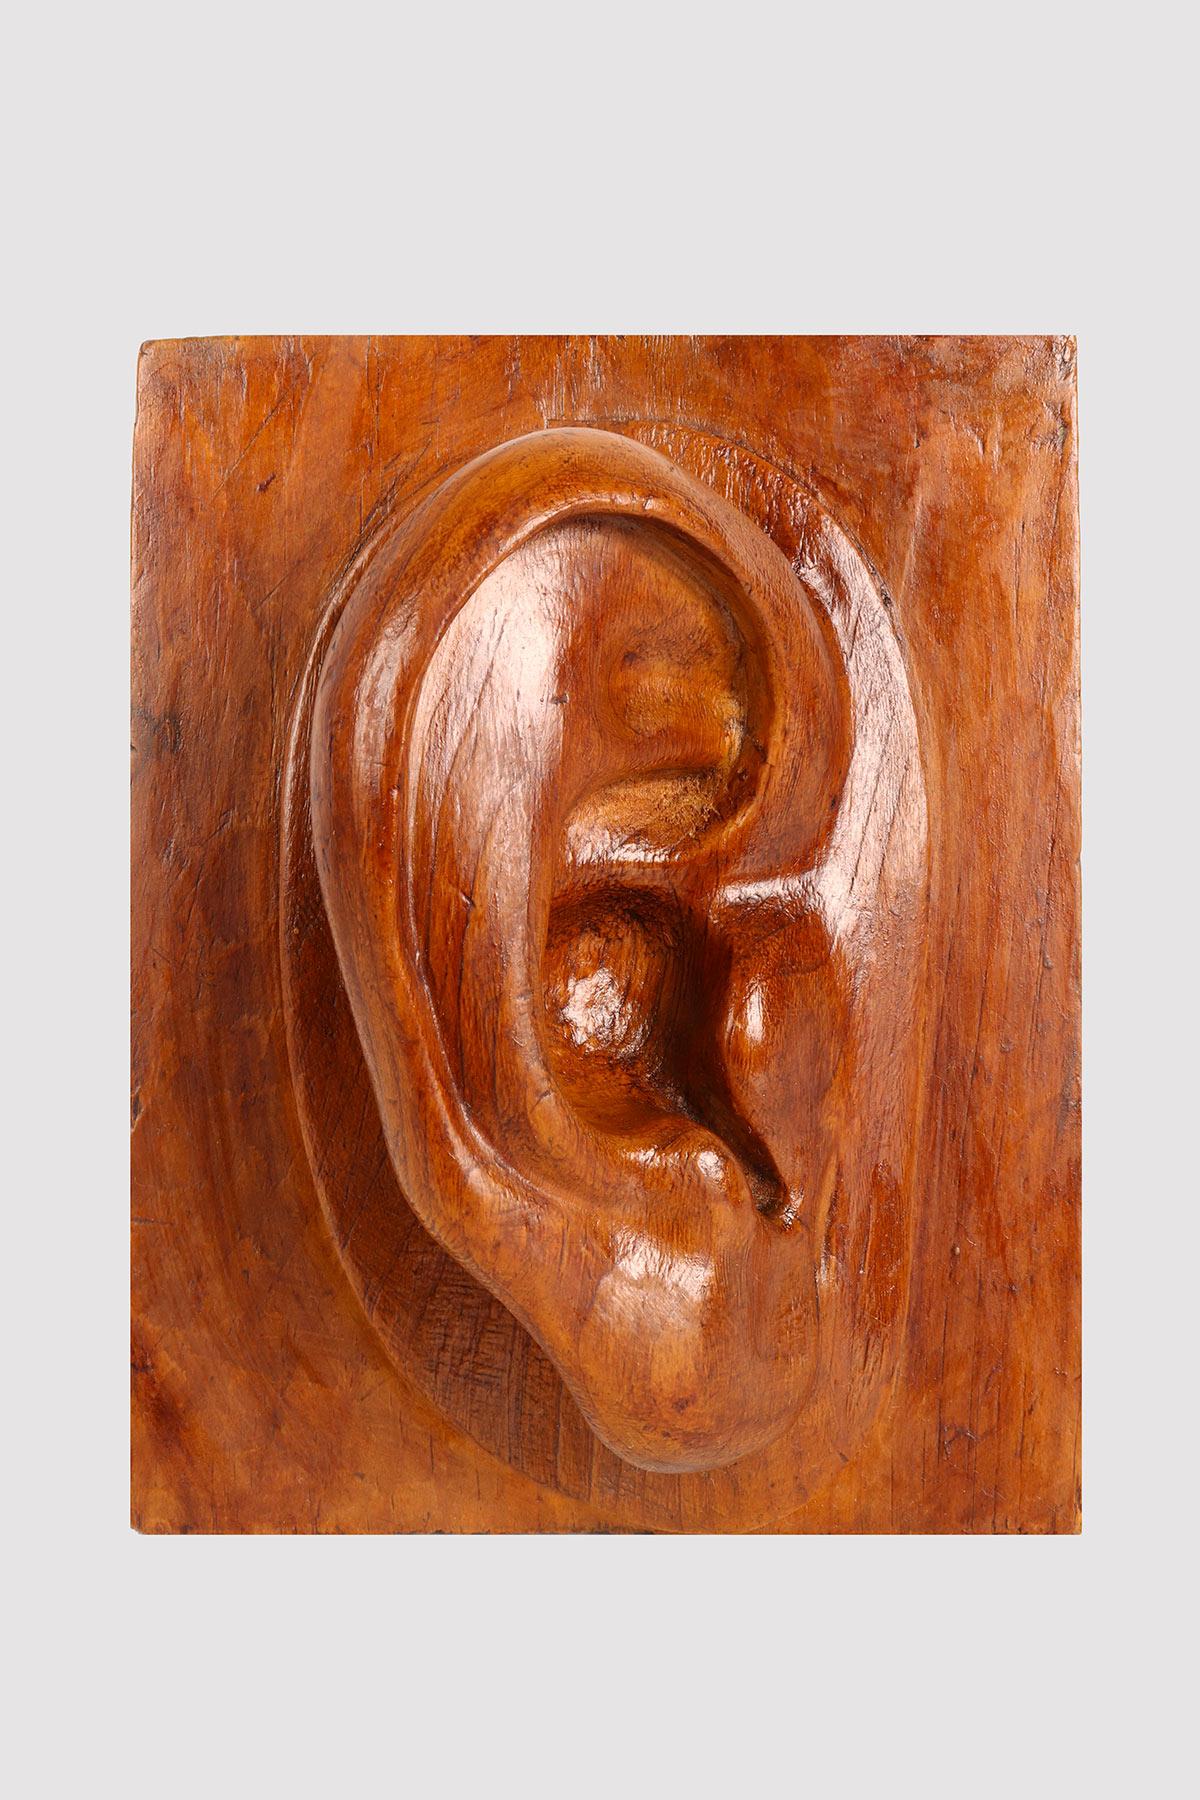 Artistic atelier sculpture depicting a ear. Made of fruit wood, the sculpture has a smooth base with an irregular geometric edge, on which is the artist's proof of refined workmanship and realism, finished down to the smallest detail. Not like in